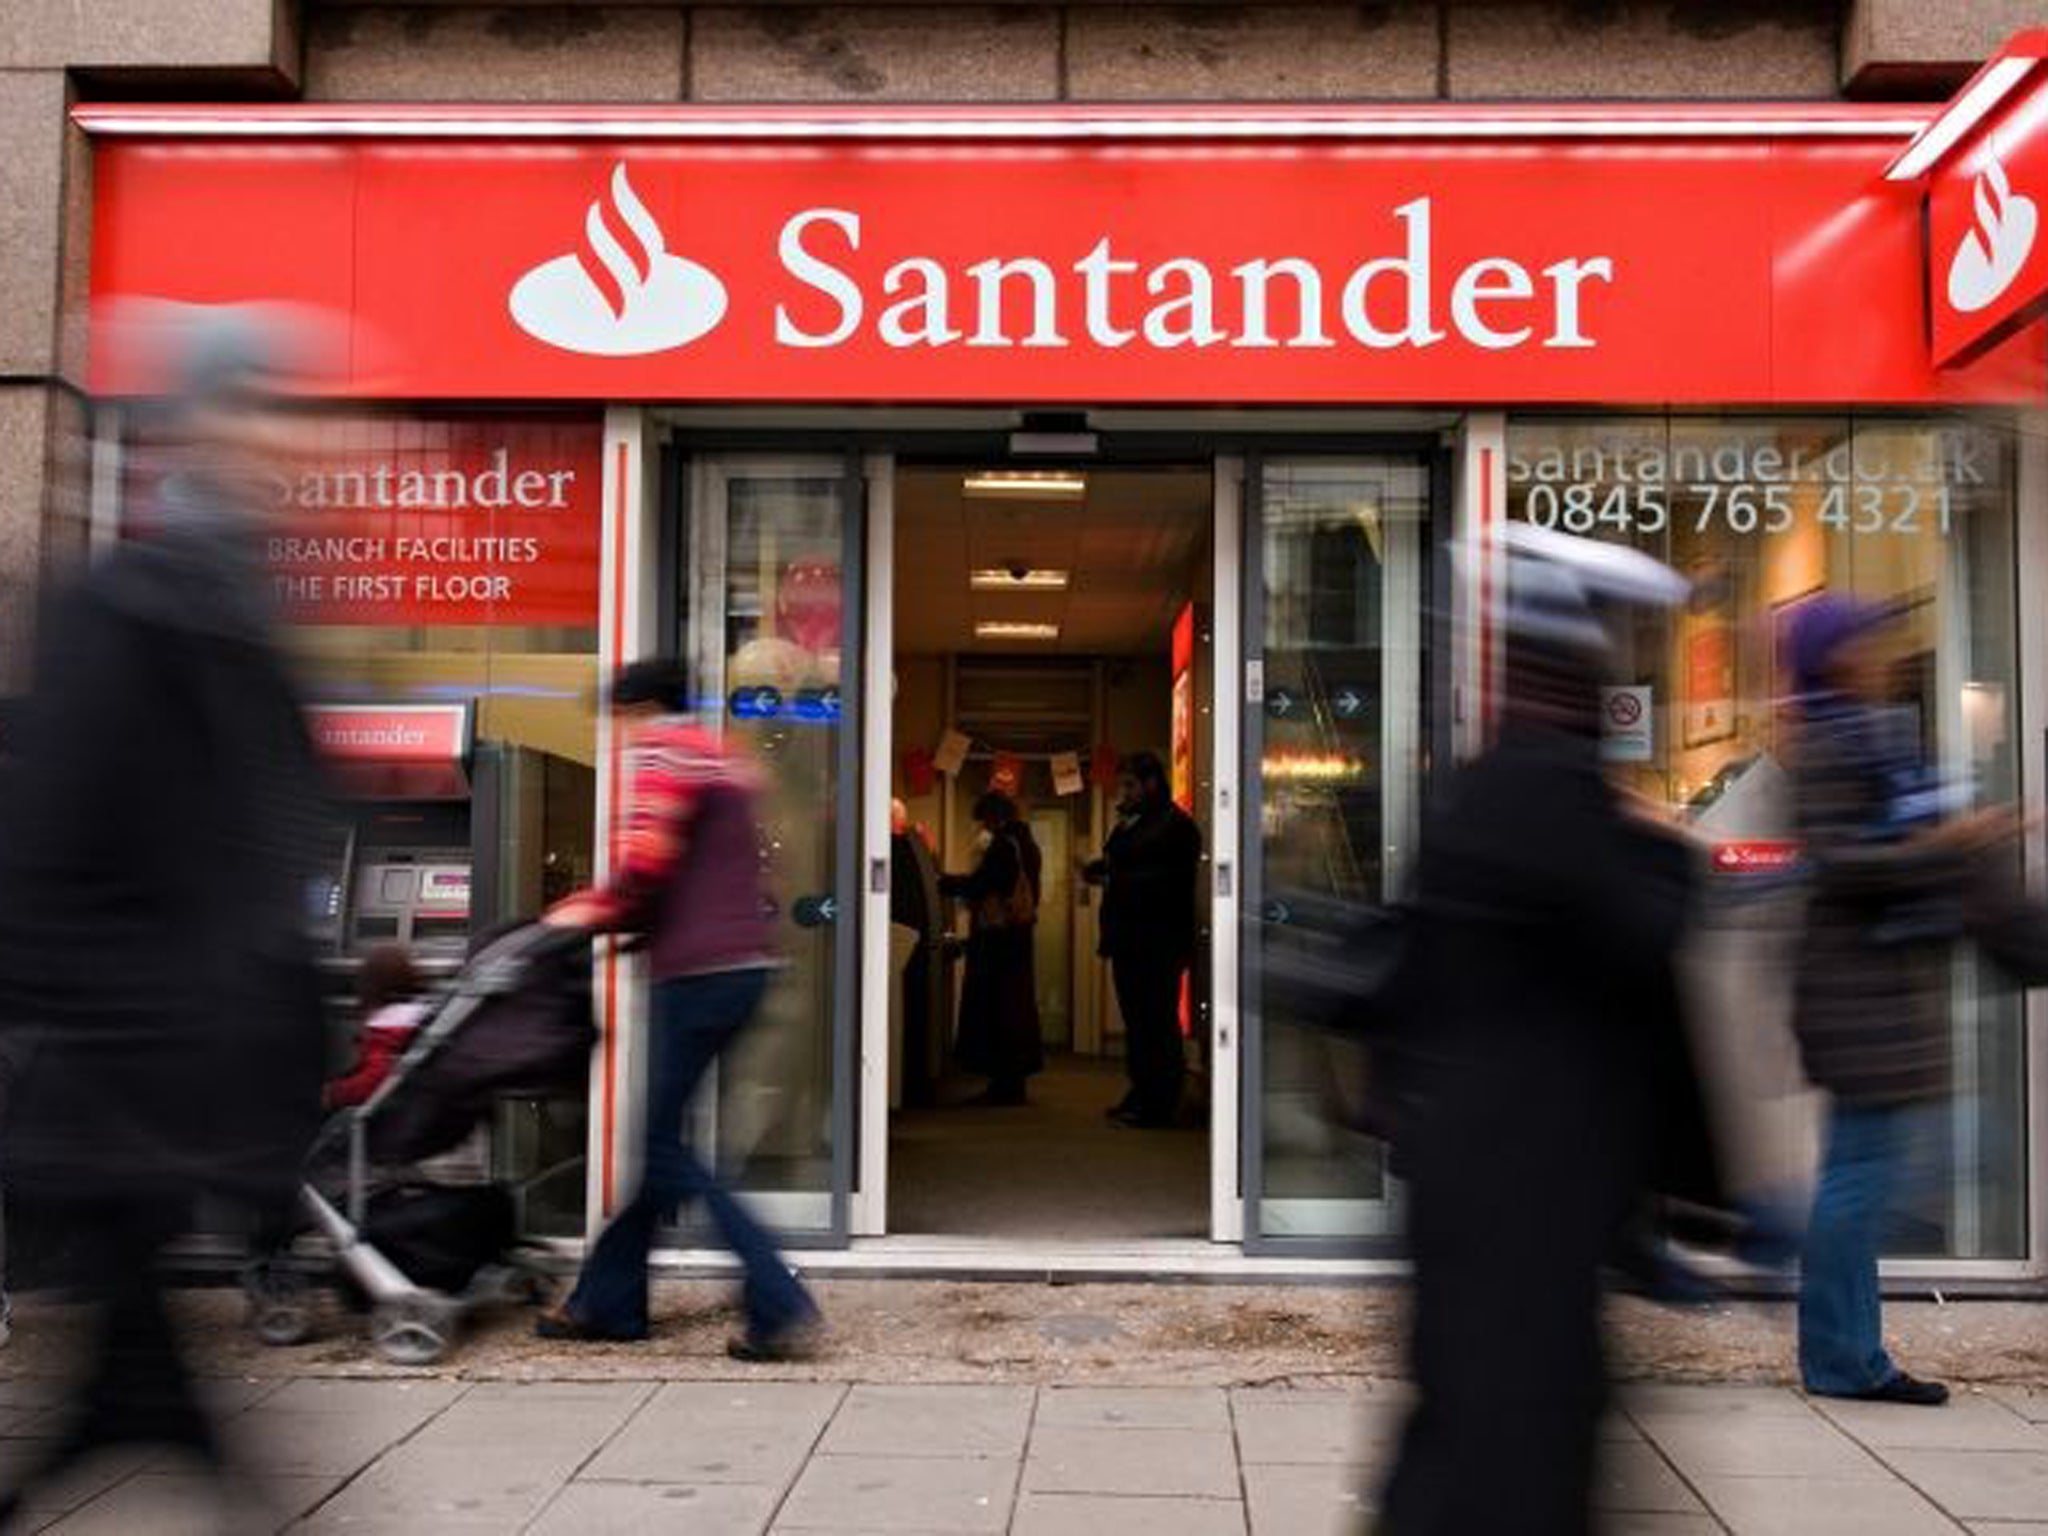 Santander will offer a range of fee-free Help to Buy mortgage products